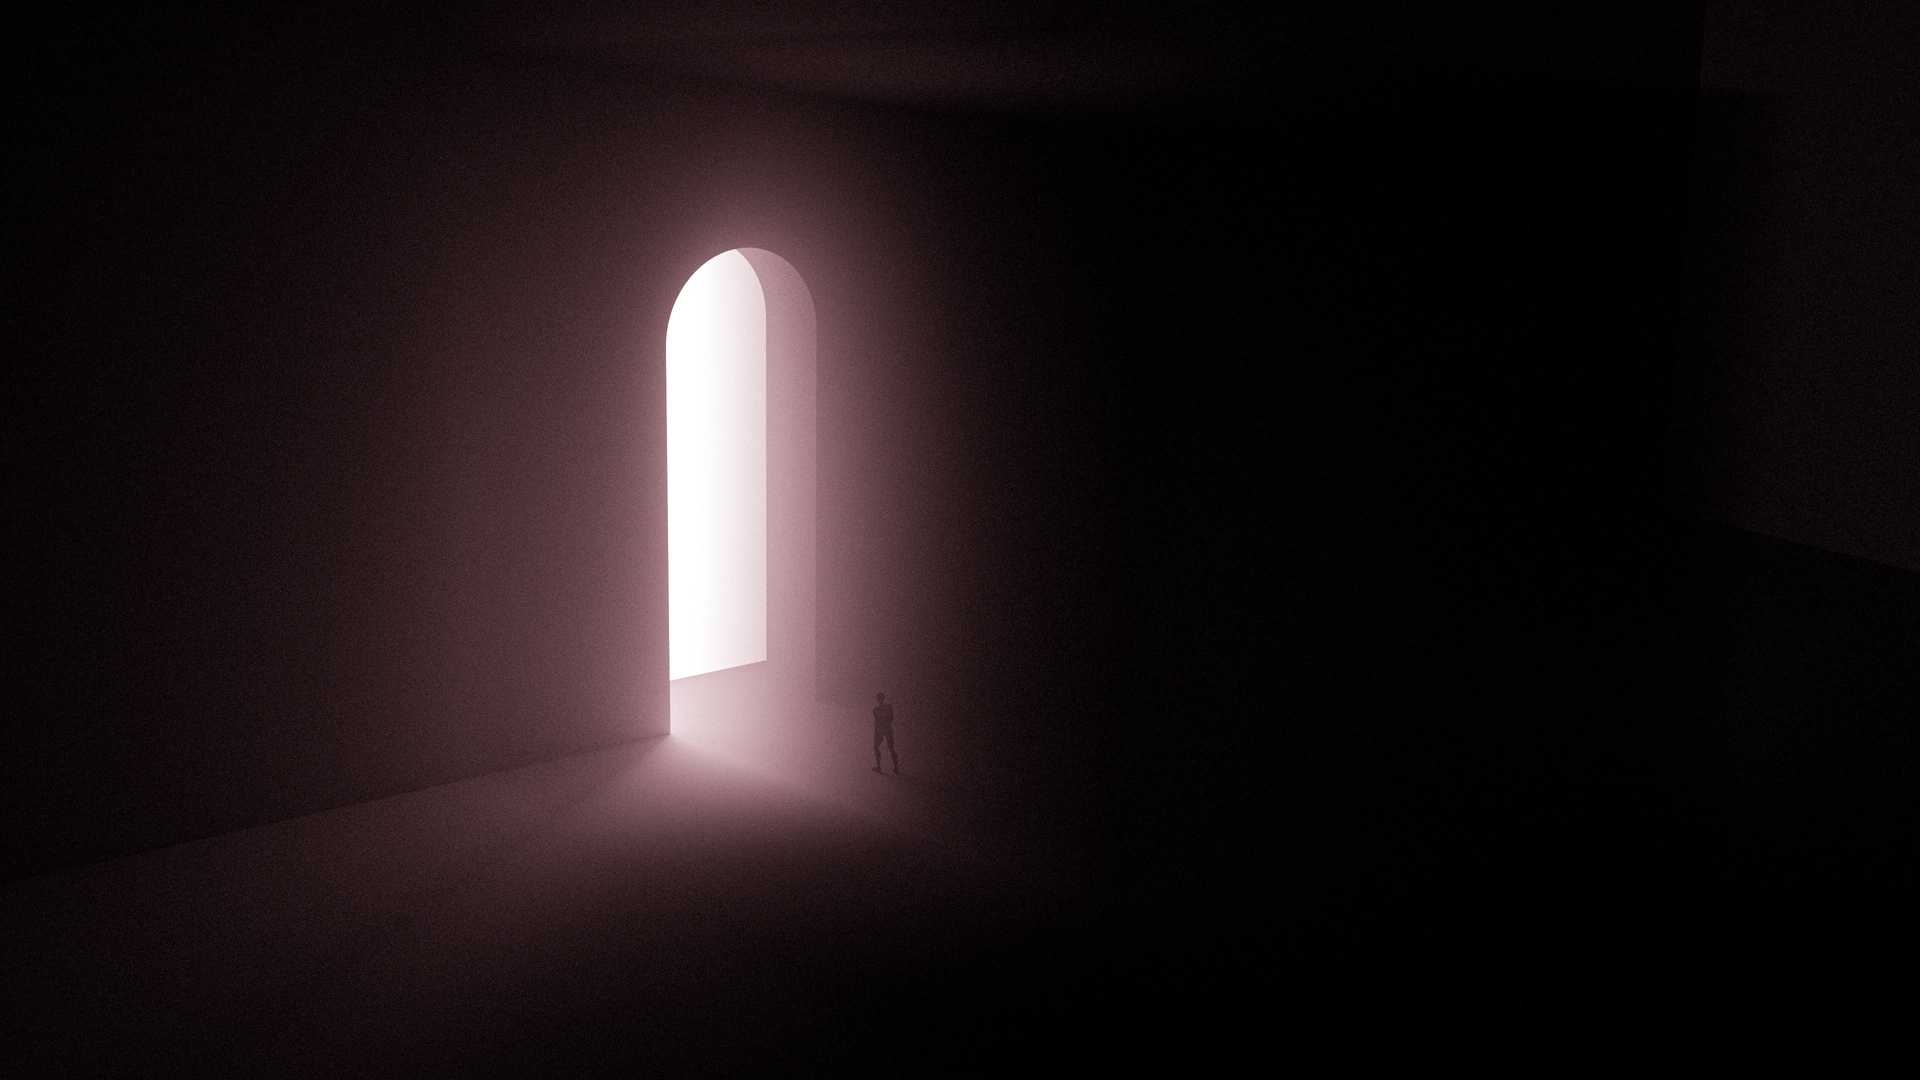 Photo by Mo Eid: https://www.pexels.com/photo/silhouette-of-person-standing-near-a-doorway-with-bright-light-8347499/